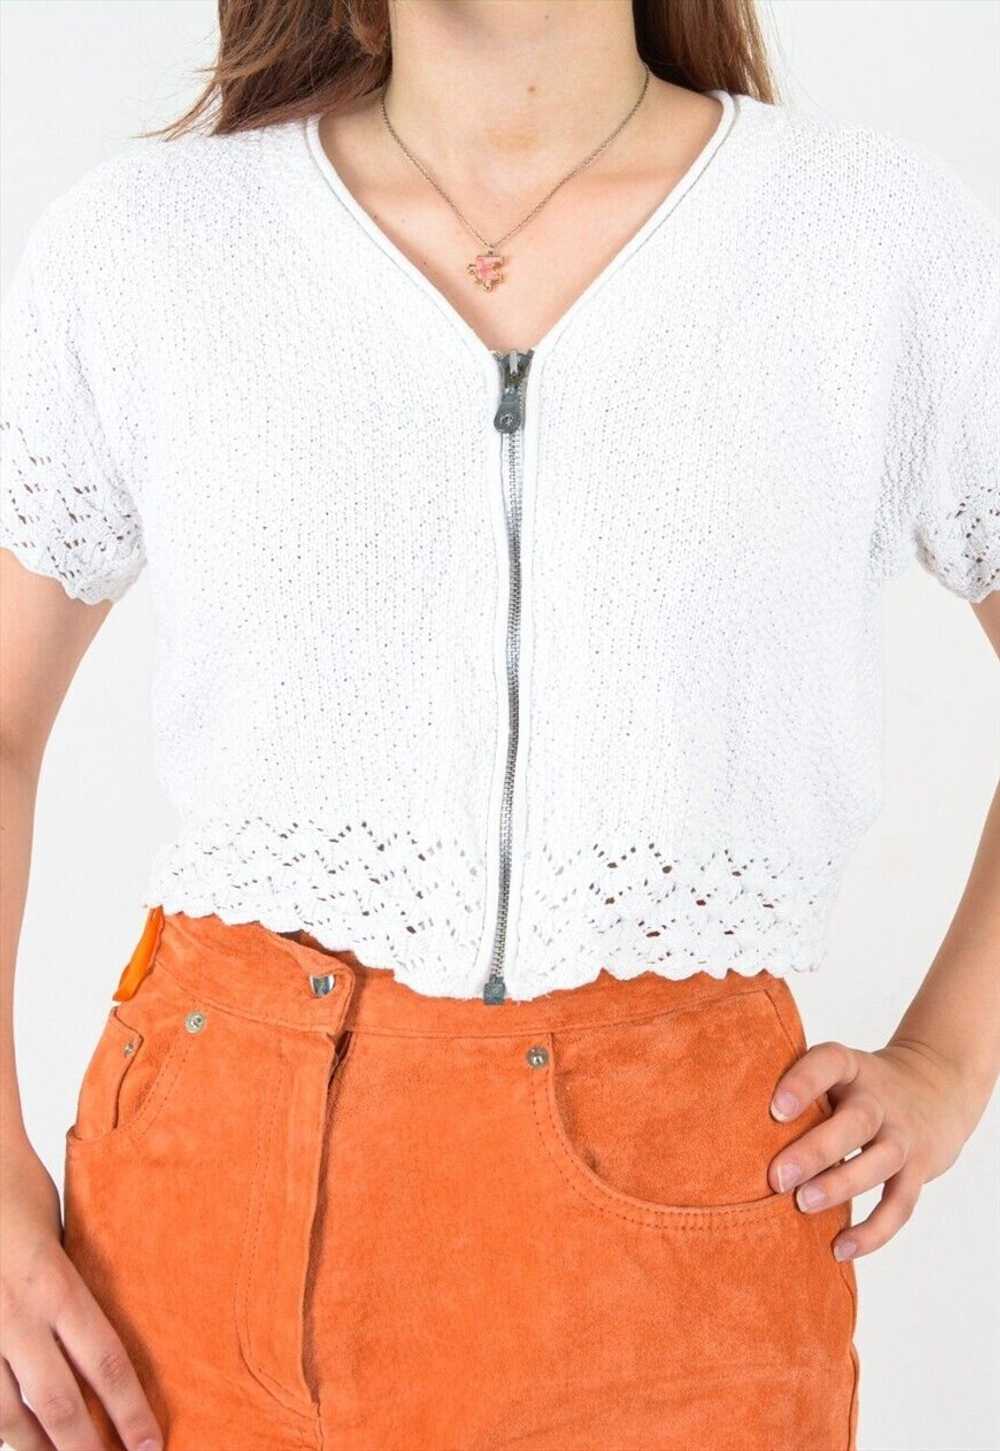 Women's M Cardigan Top Shirt Knitted Lace Crochet… - image 4